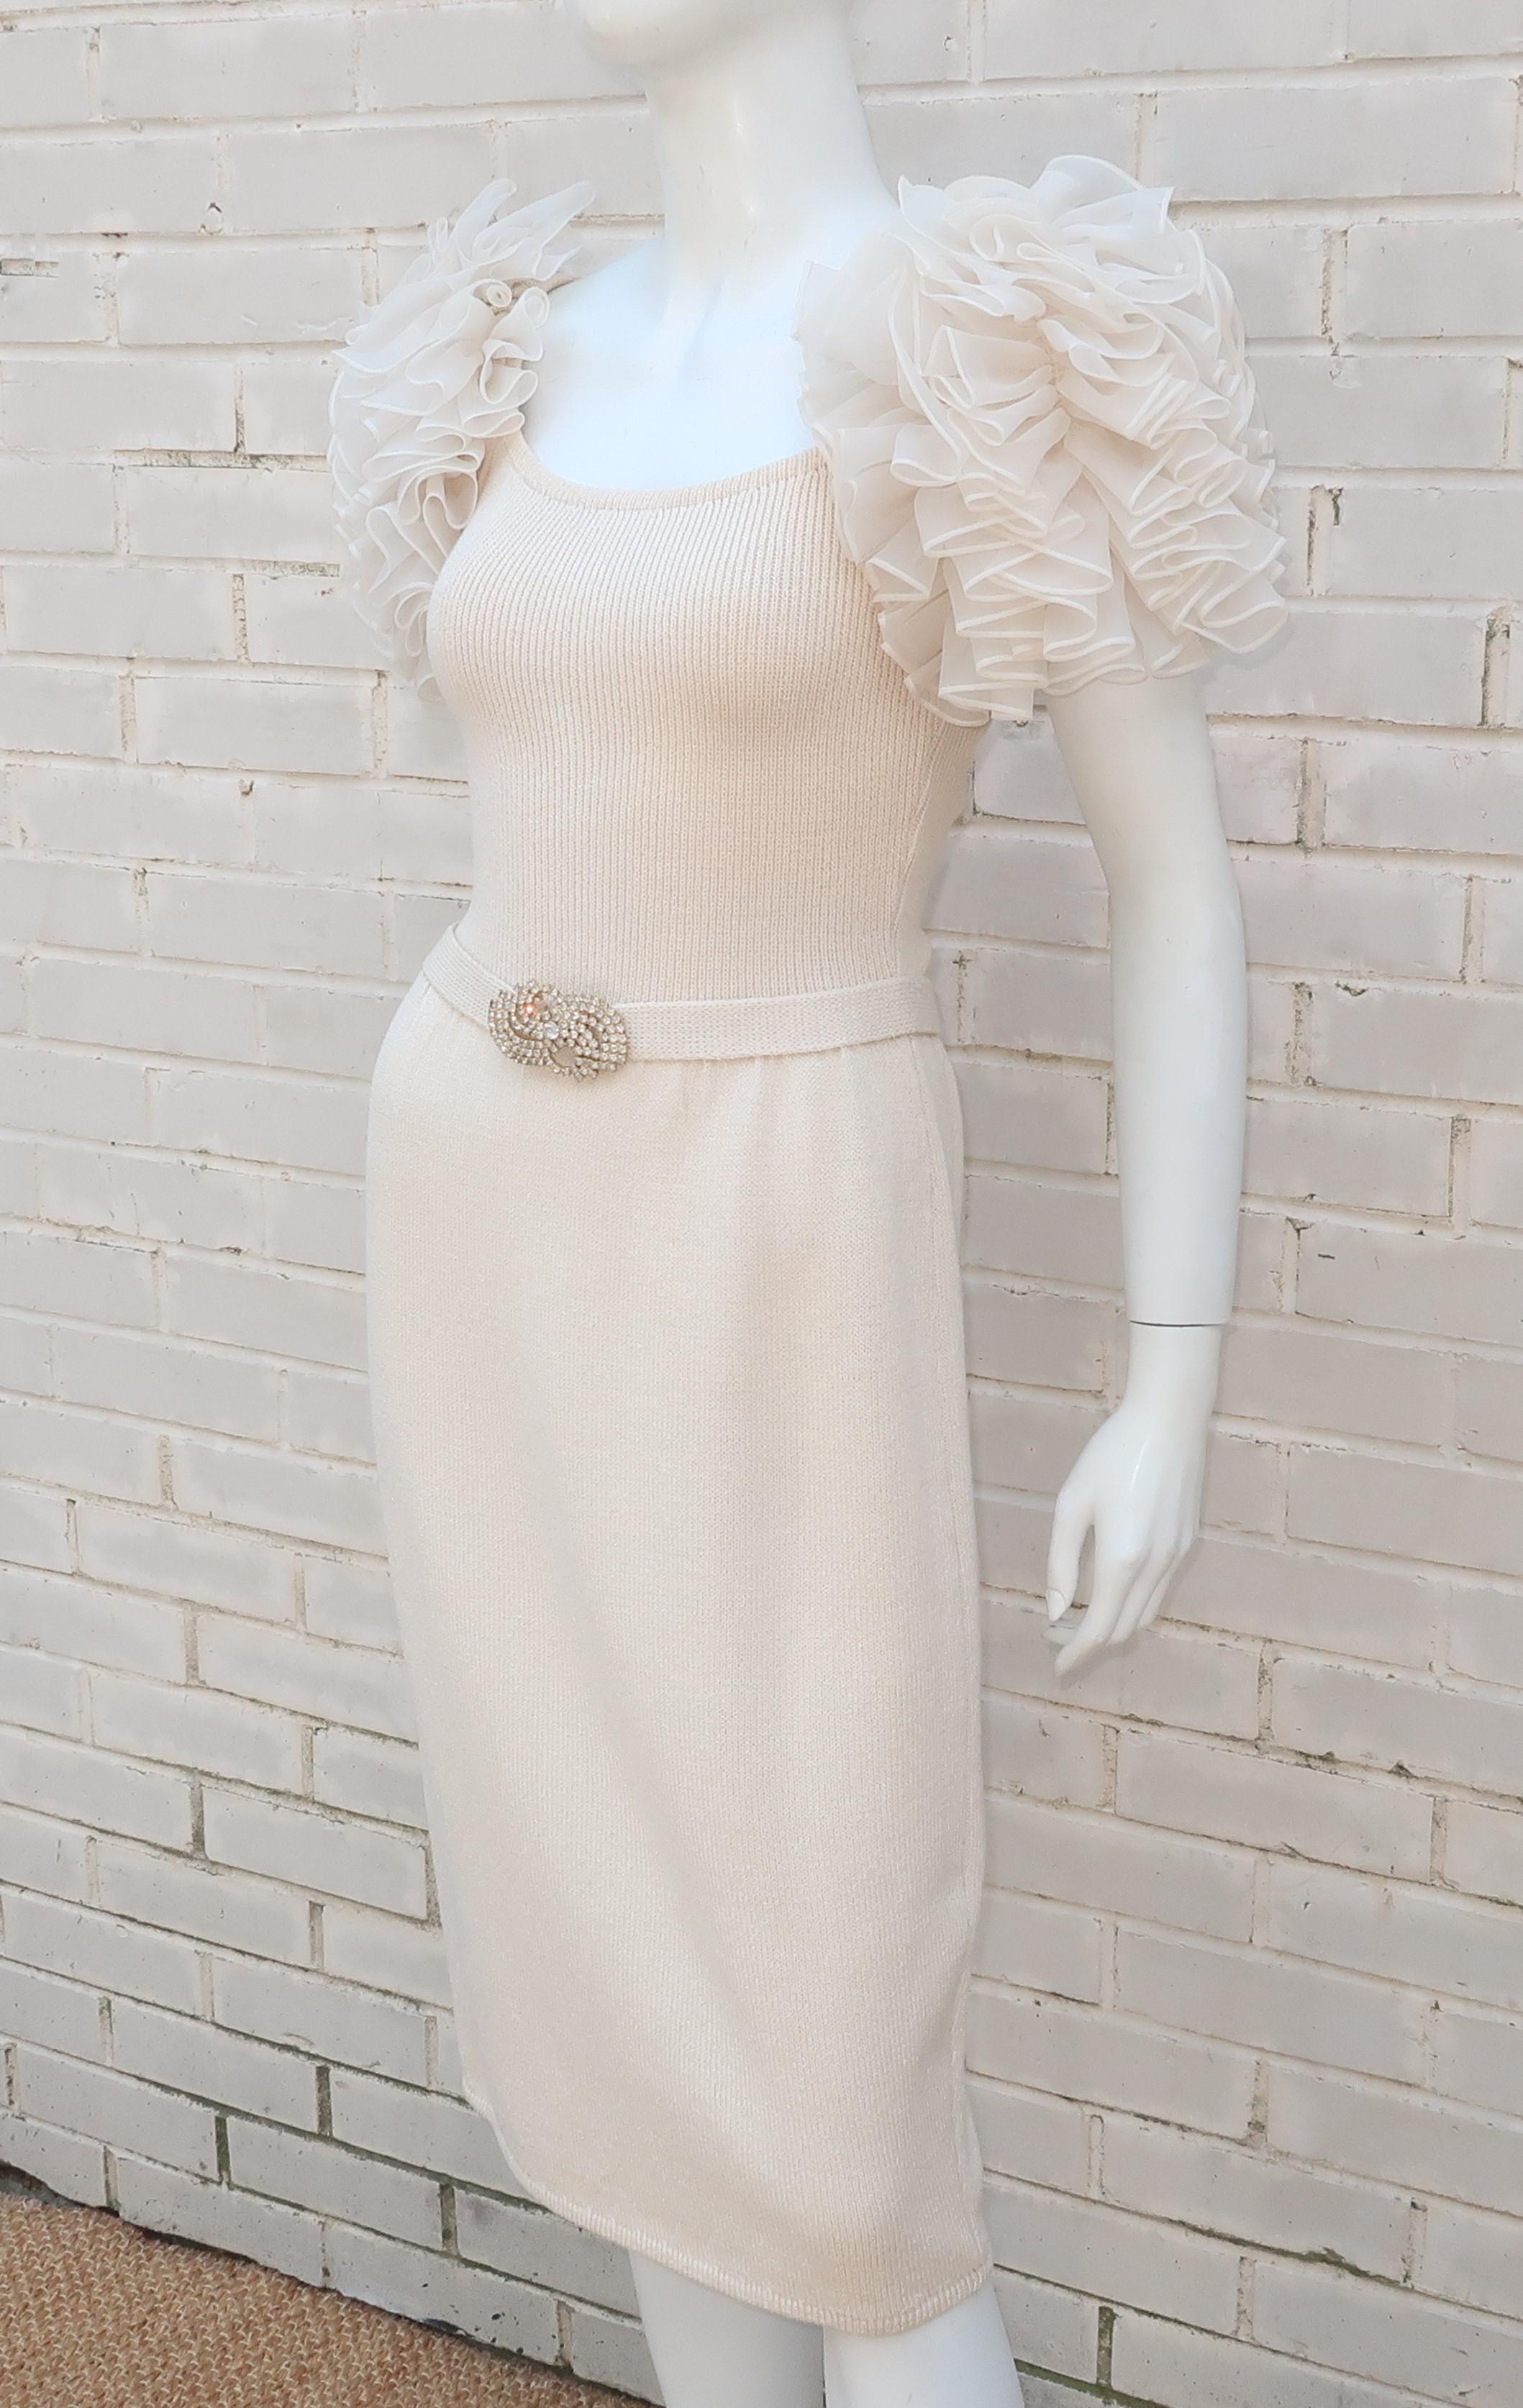 Ivory White Knit Cocktail Dress With Ruffled Sleeves & Rhinestones, C.1980 3